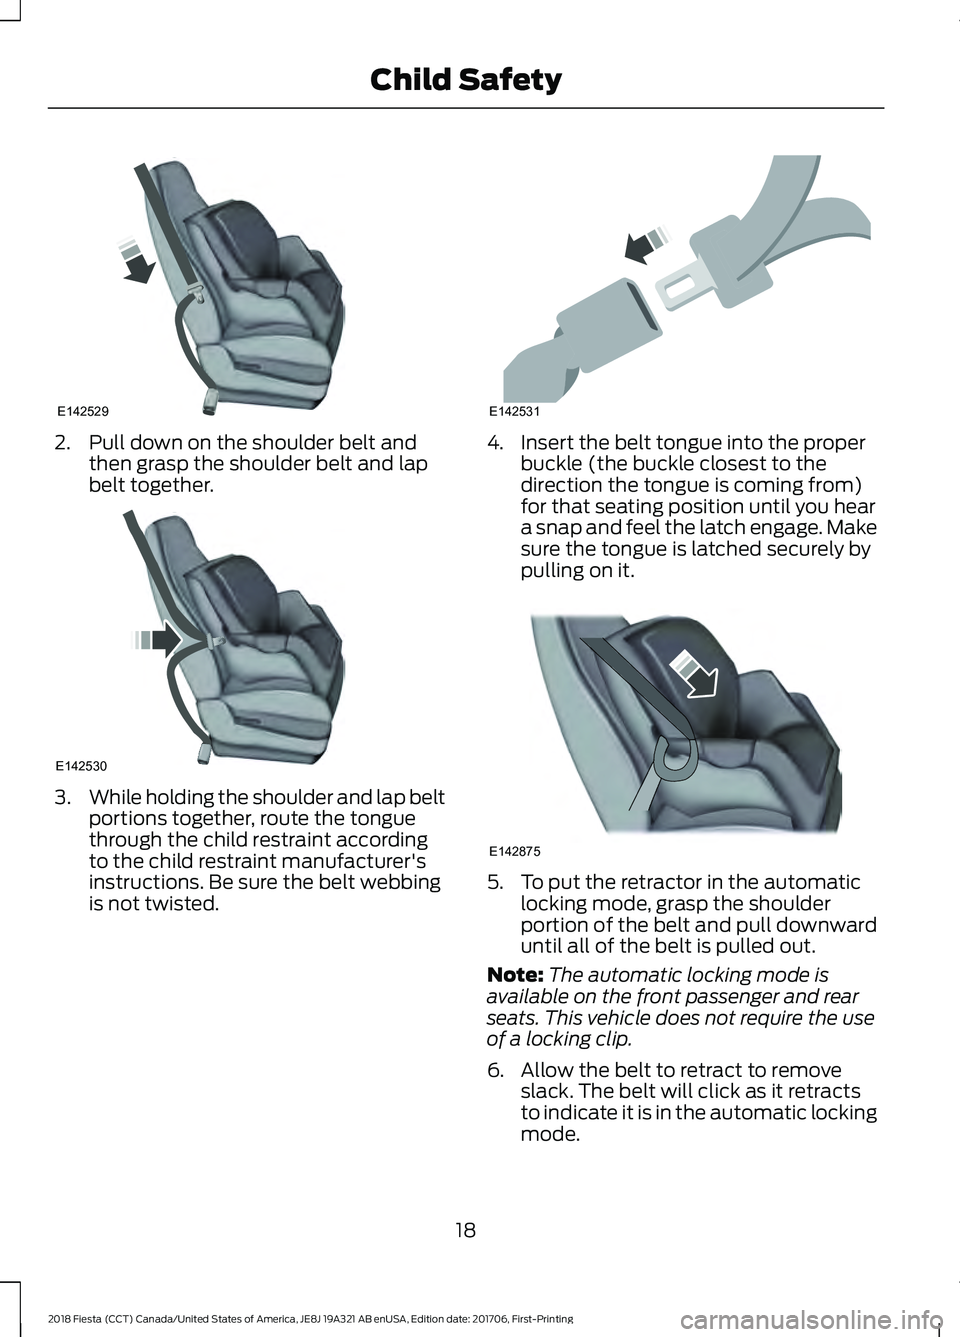 FORD FIESTA 2018  Owners Manual 2. Pull down on the shoulder belt and
then grasp the shoulder belt and lap
belt together. 3.
While holding the shoulder and lap belt
portions together, route the tongue
through the child restraint acc